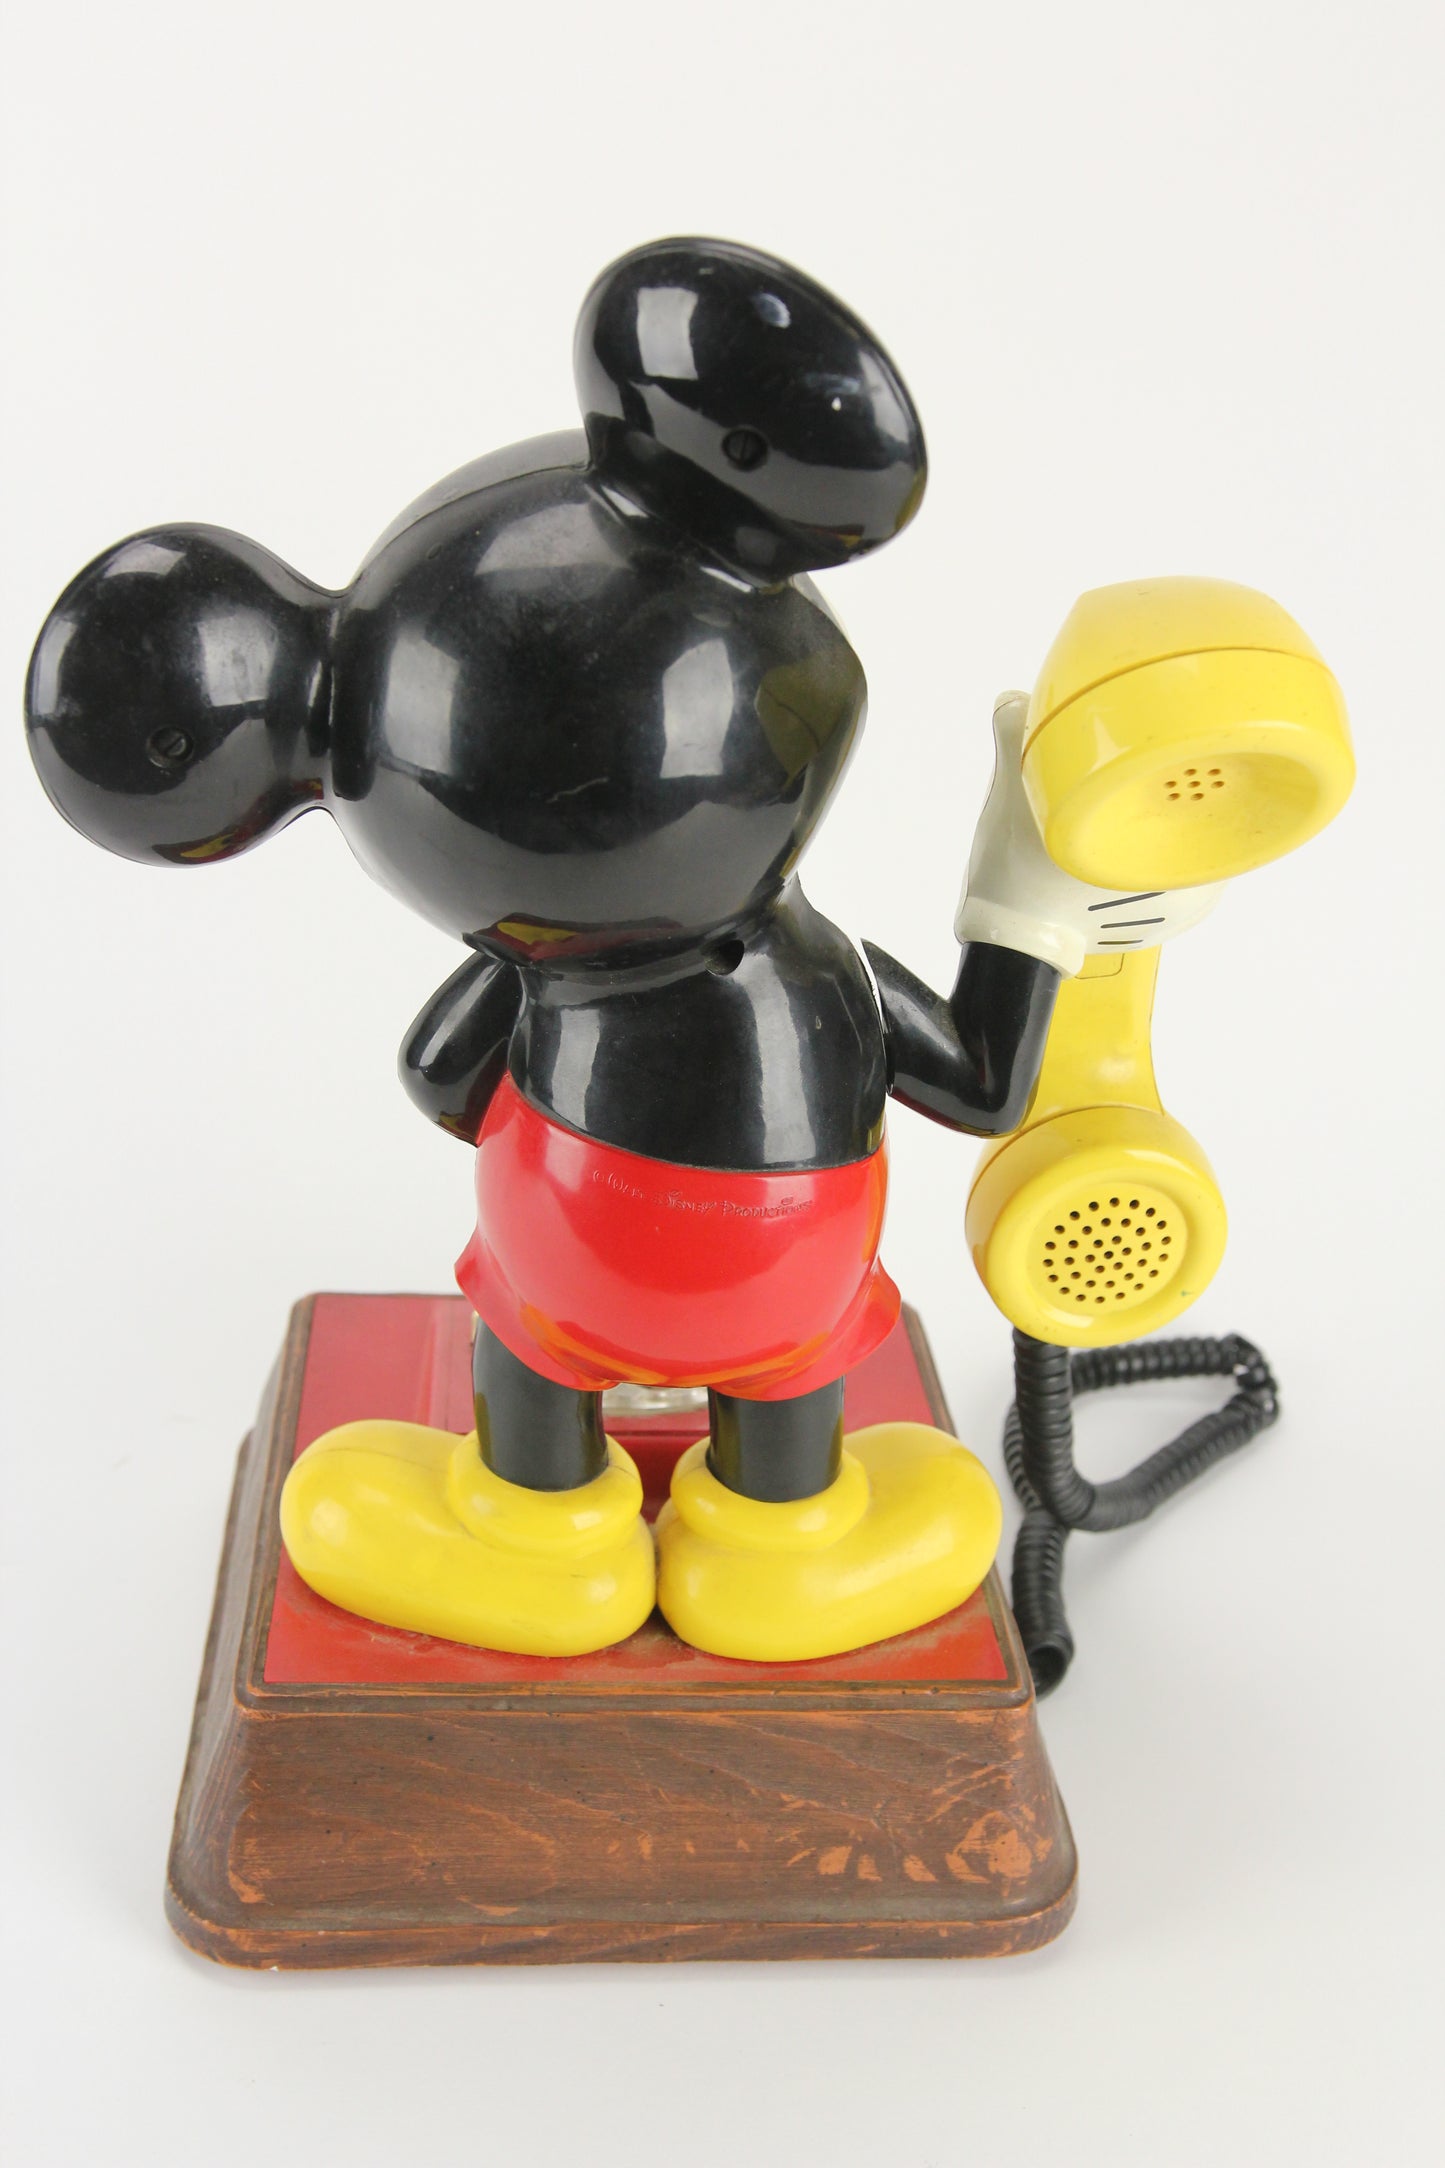 The Mickey Mouse Rotary Phone by American Telecommunications Corporation, 1976